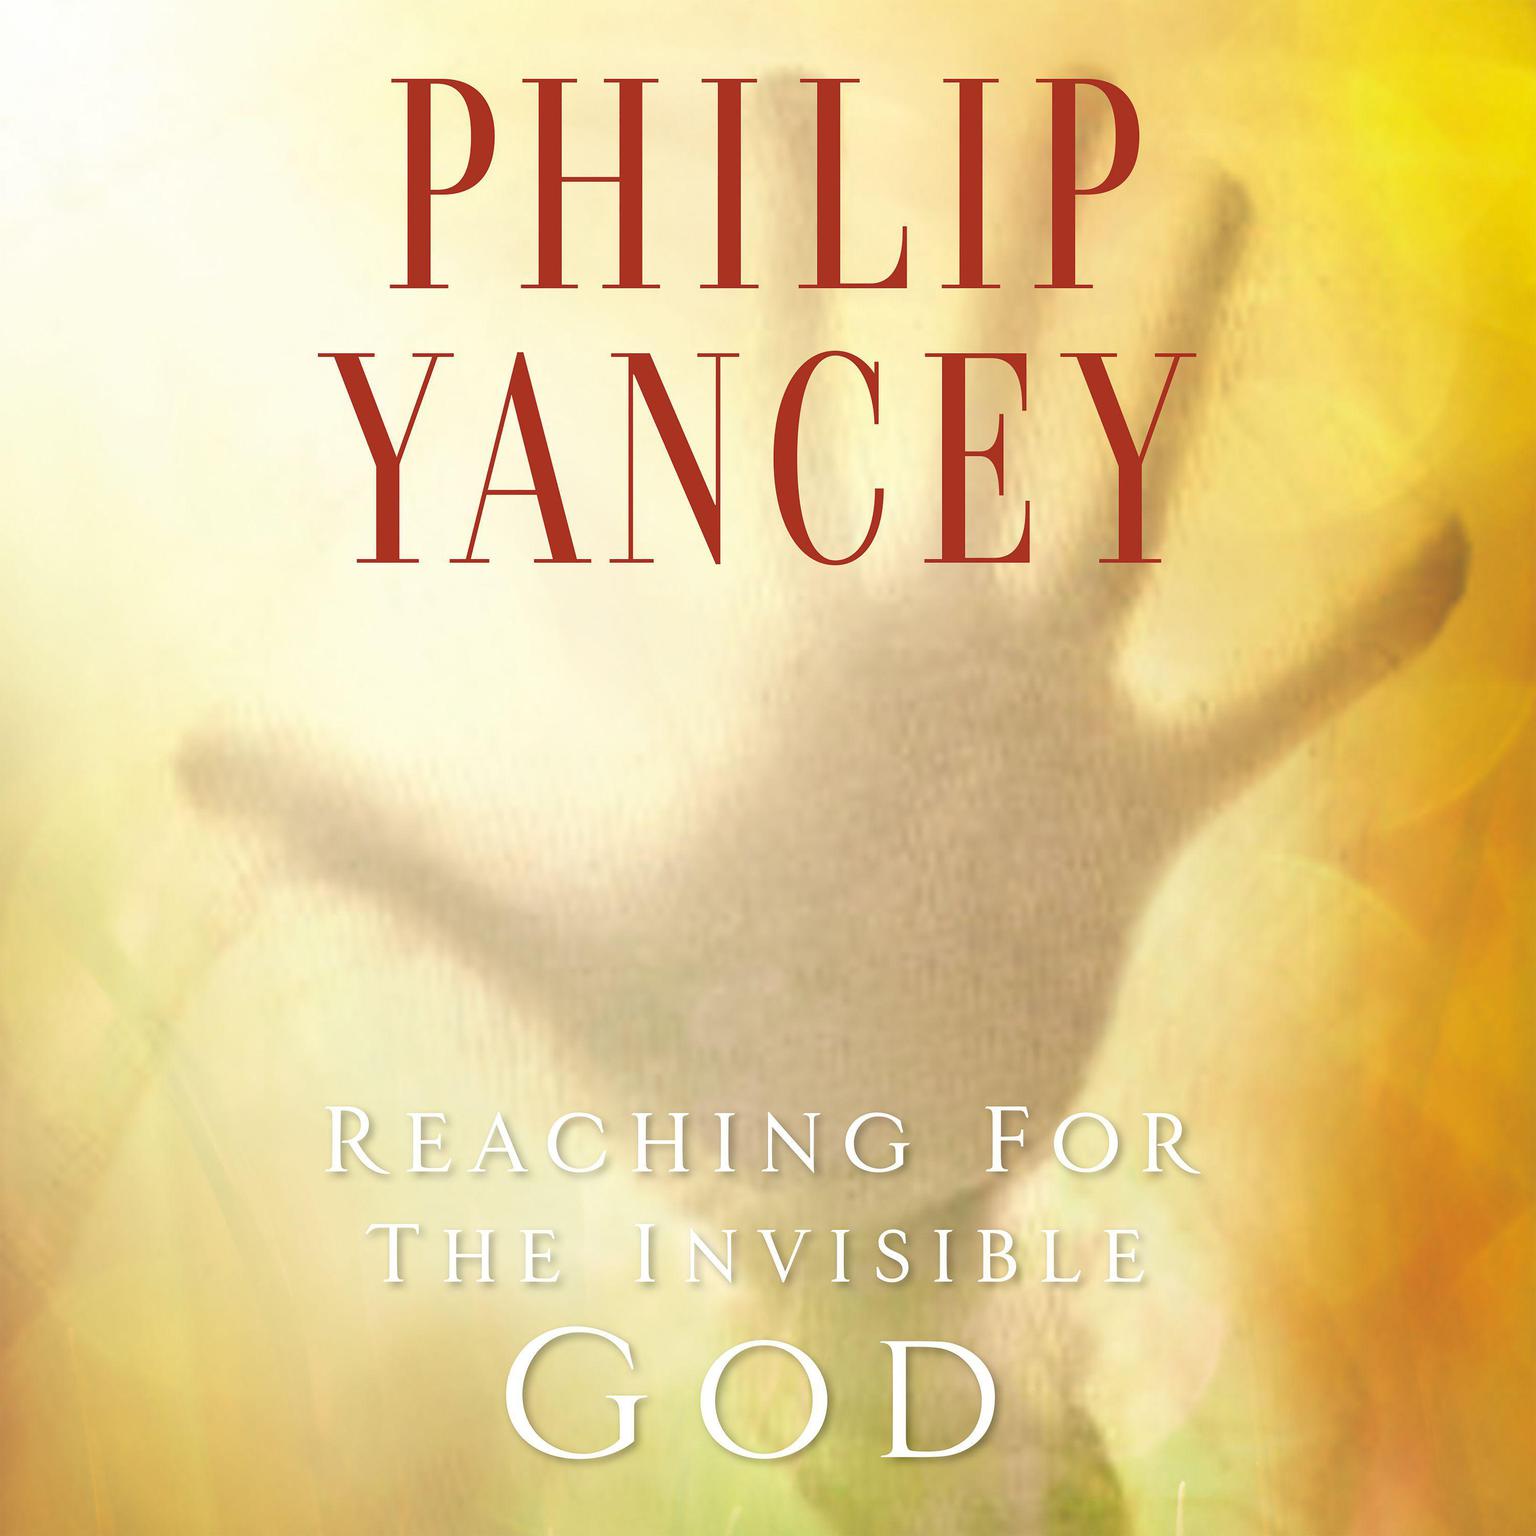 Reaching for the Invisible God (Abridged): What Can We Expect to Find? Audiobook, by Philip Yancey